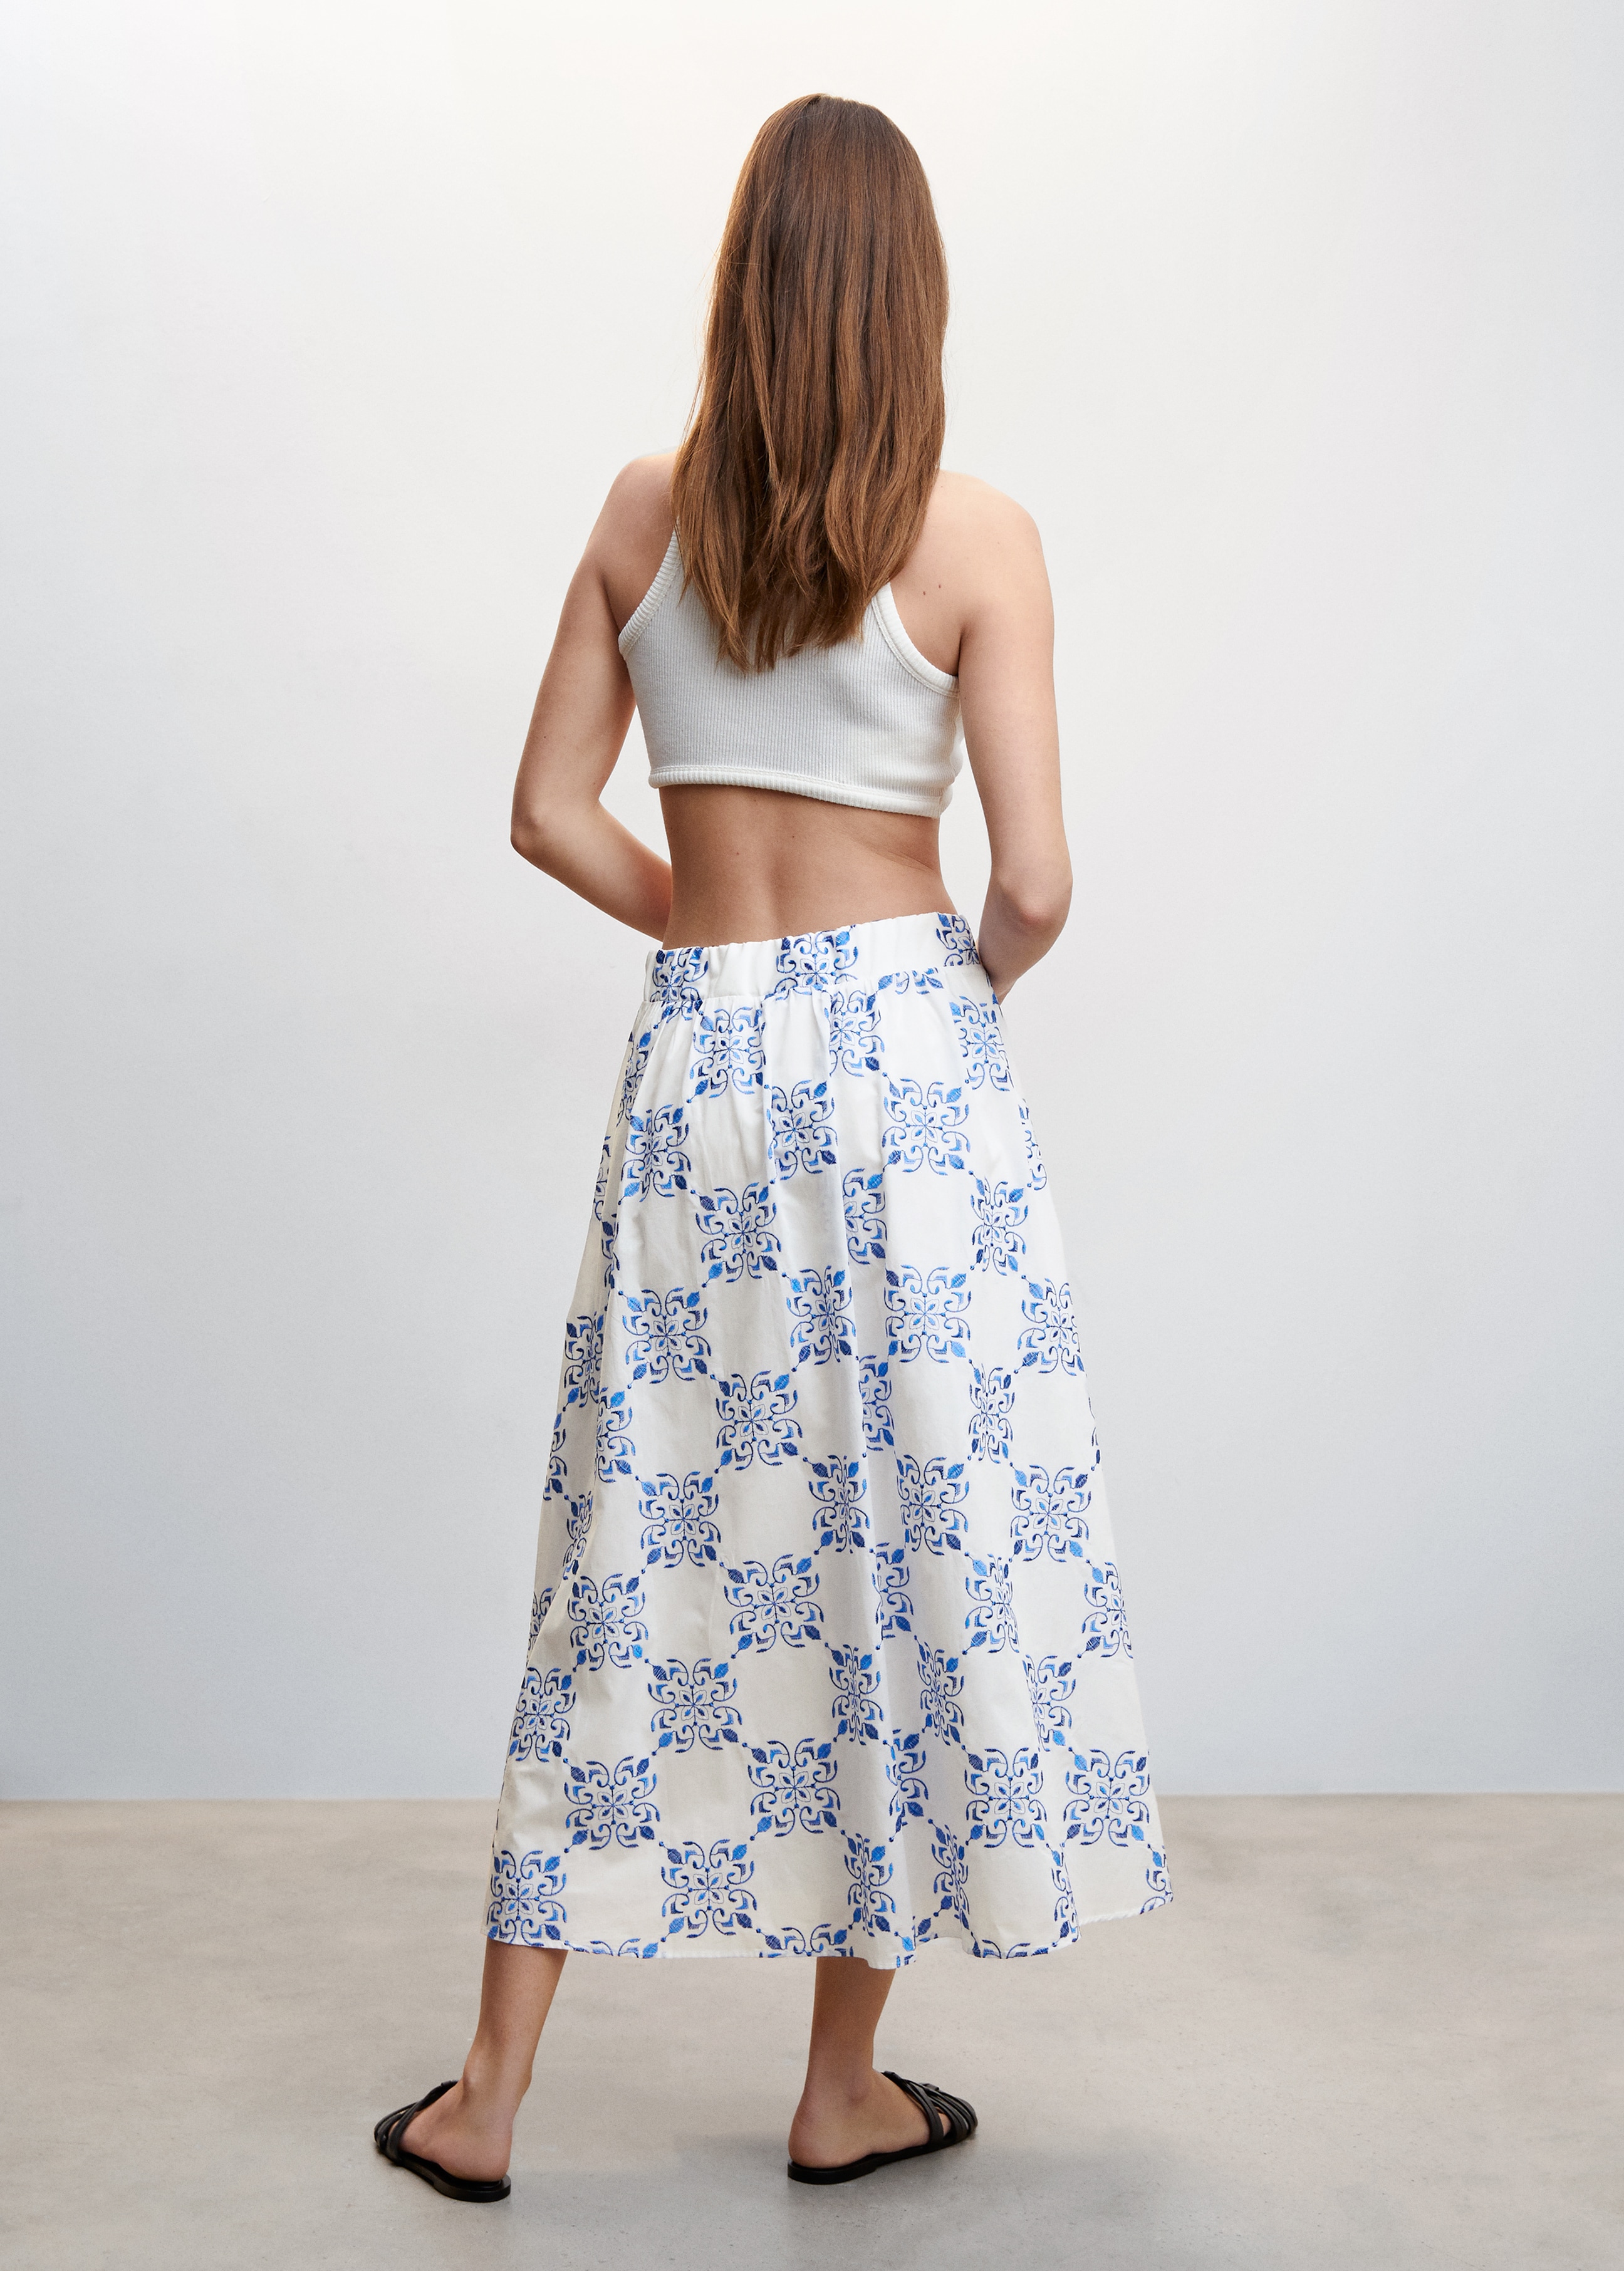 Printed skirt with pleat detail